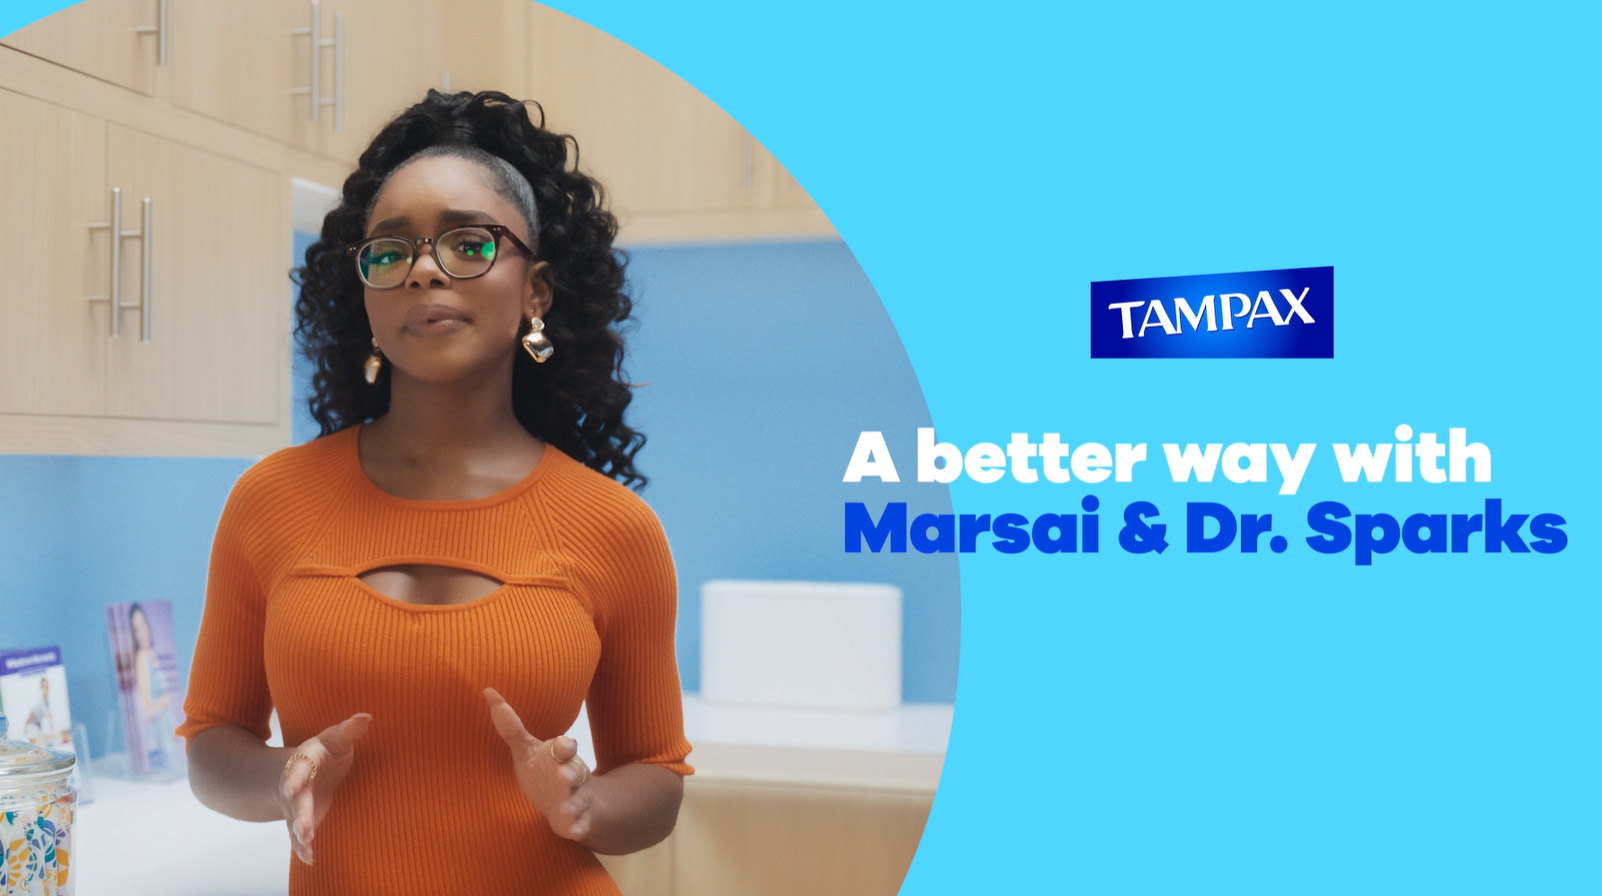 A Better Way to Period with Marsai and Dr. Sparks